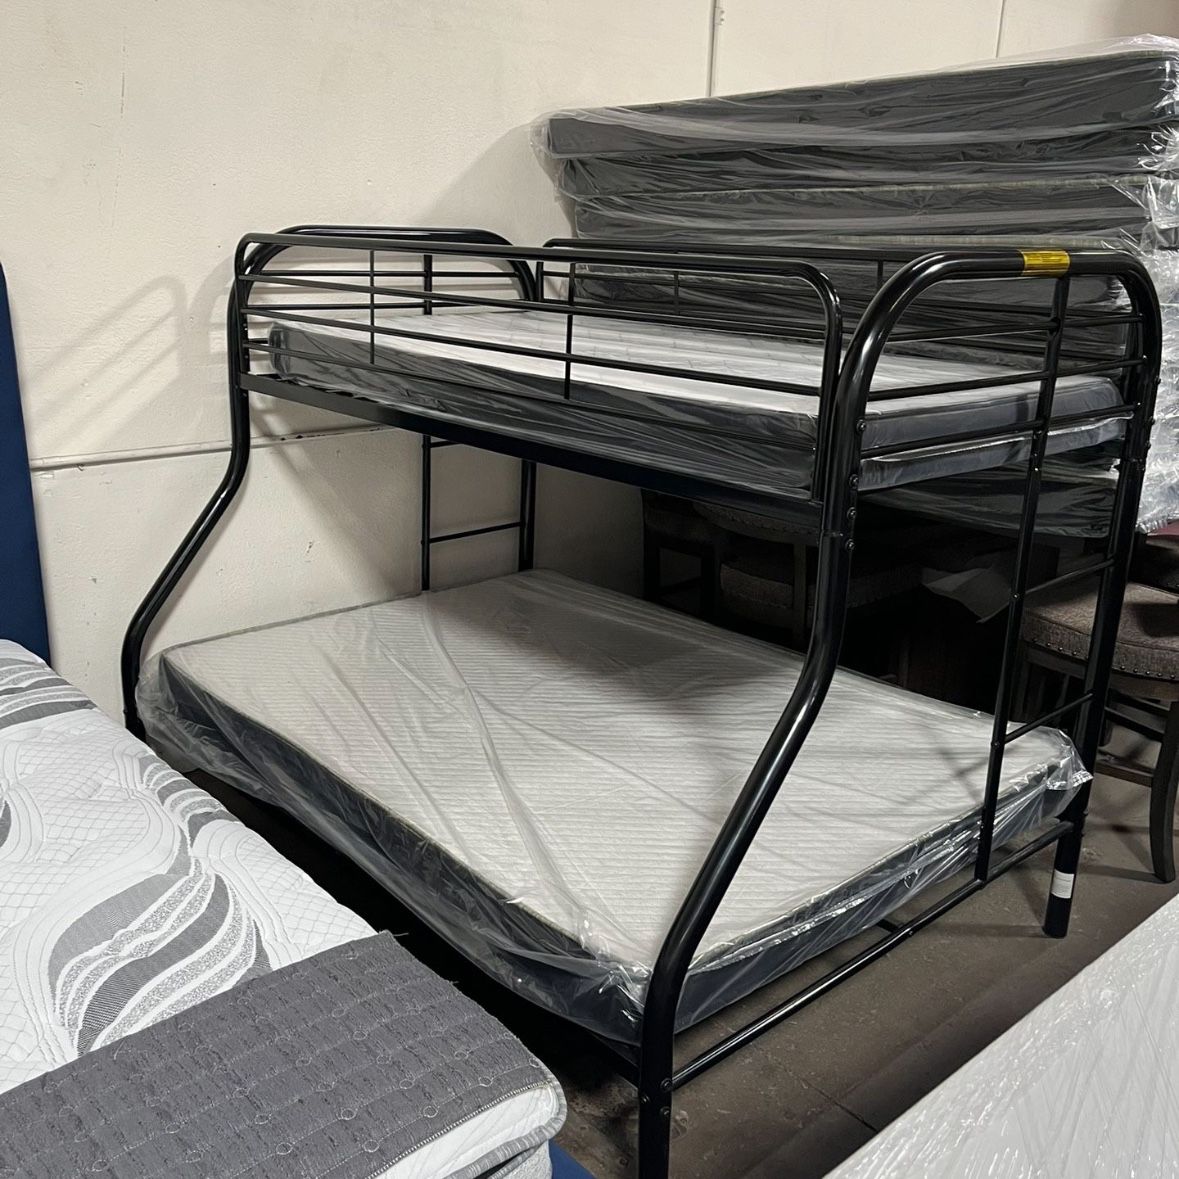 Full-twin Bunk Bed With Mattress 